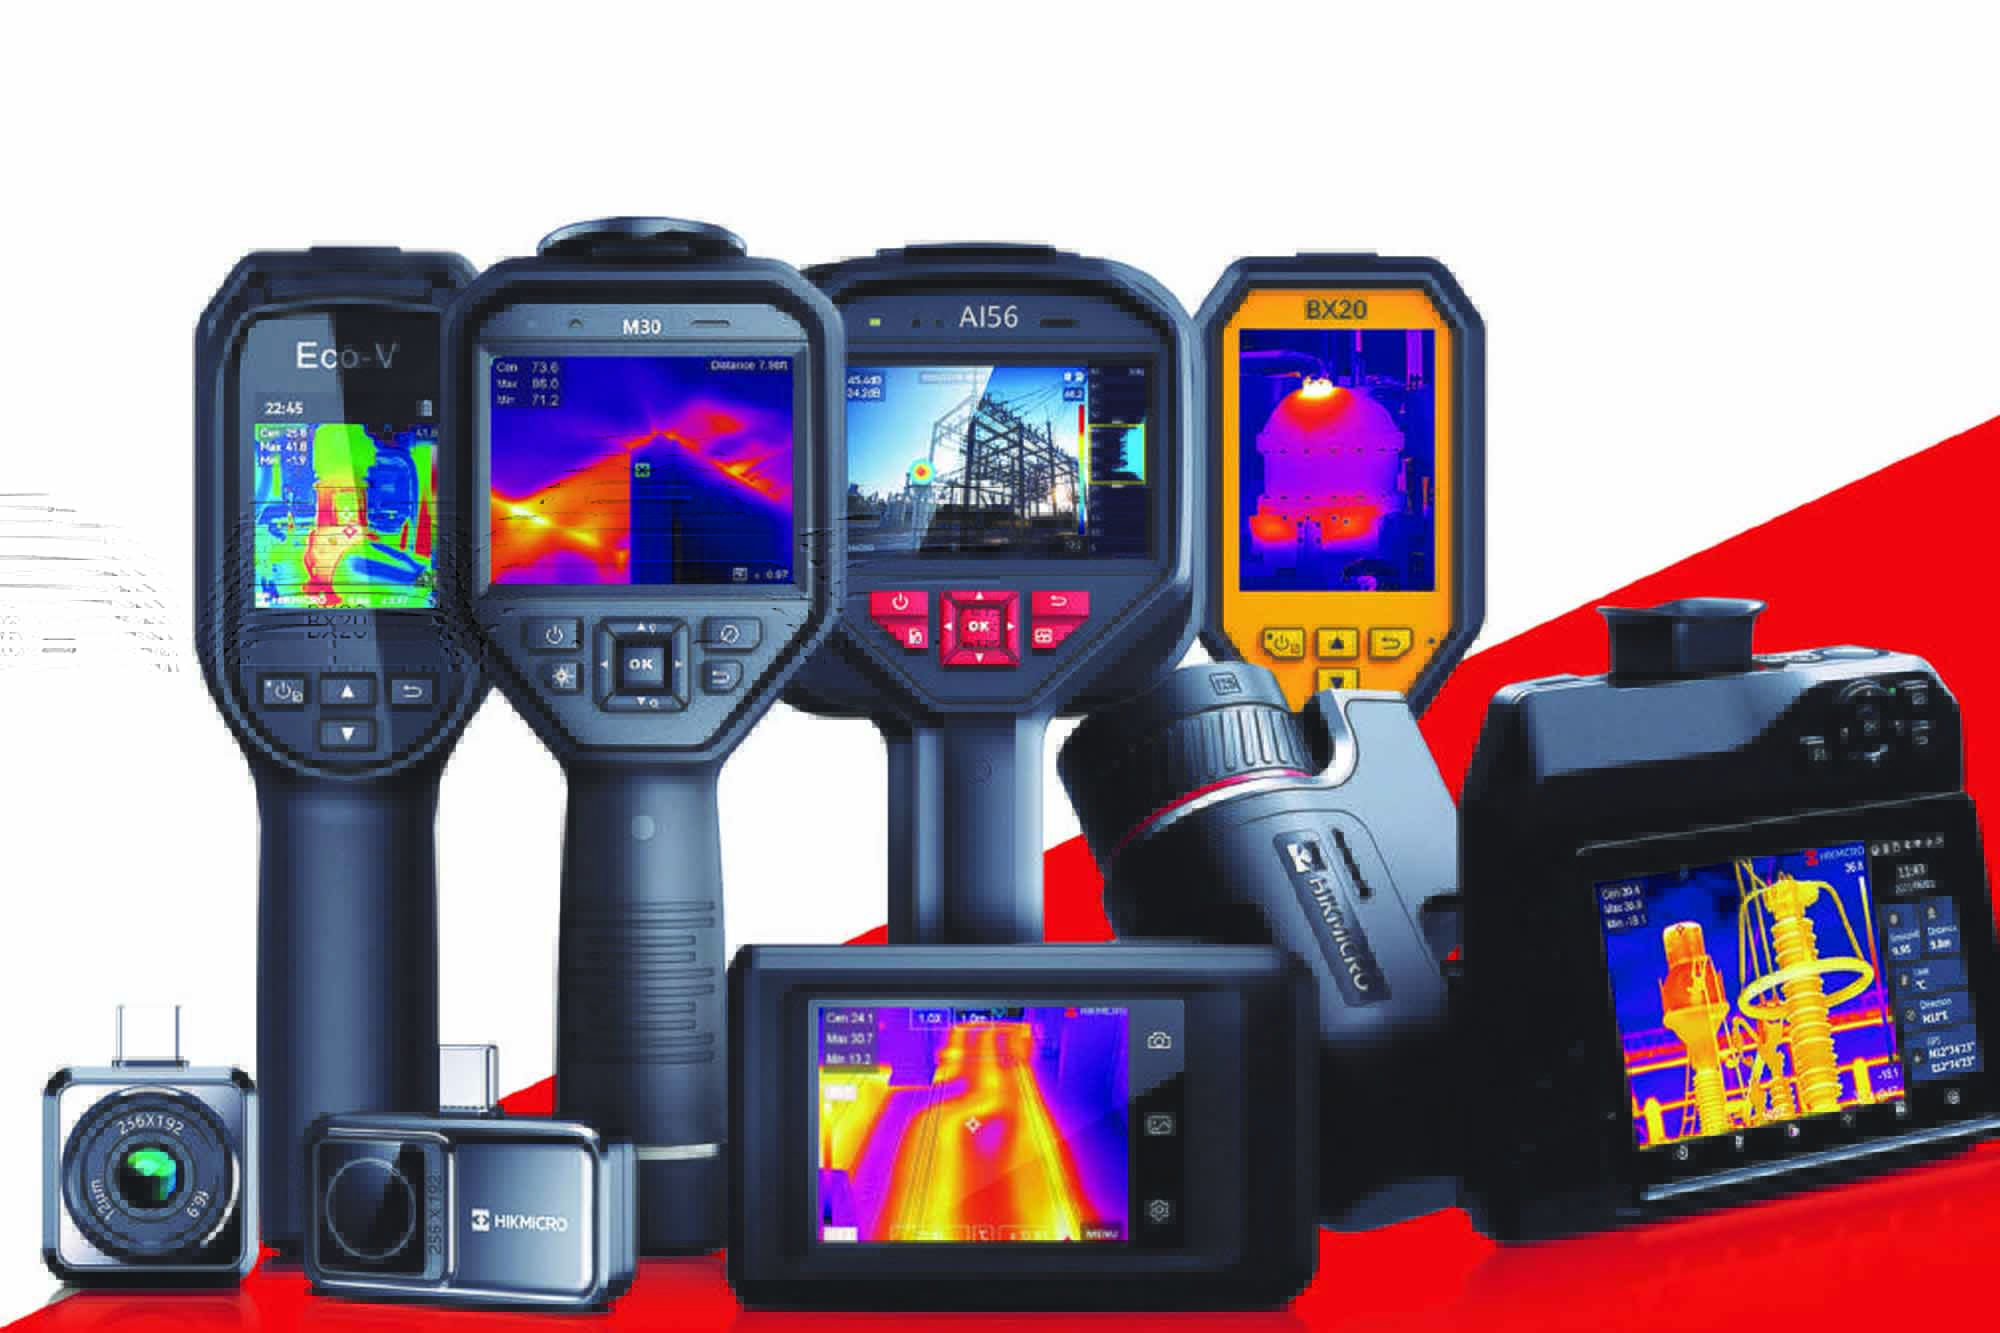 Versatility of thermal imaging applications across industries improves efficiency in equipment maintenance